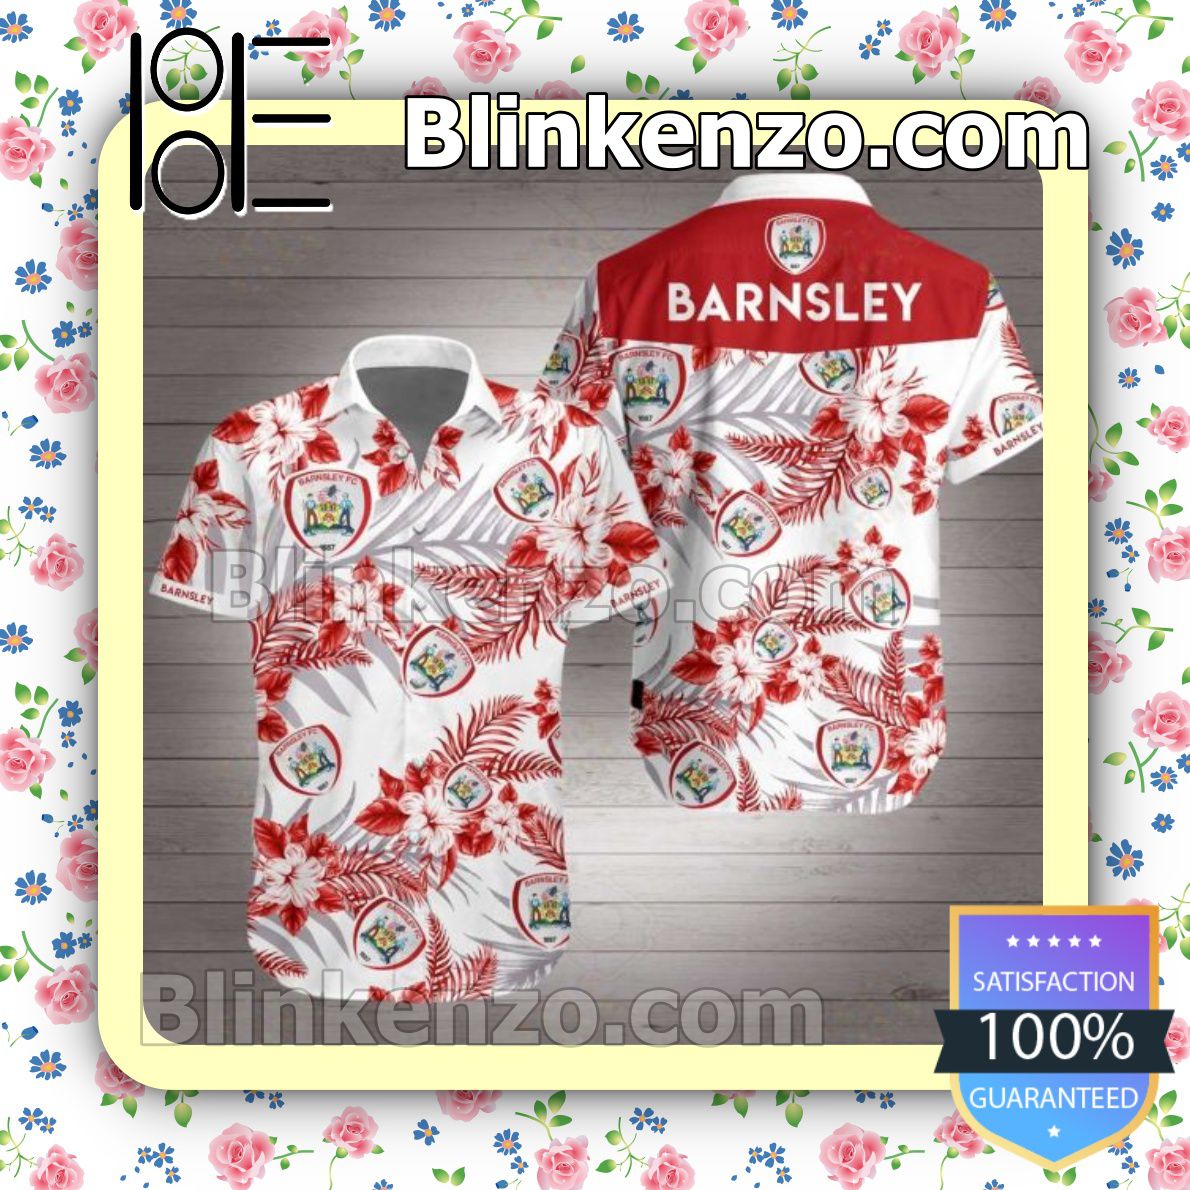 Sale Off Barnsley Red Tropical Floral White Summer Shirts